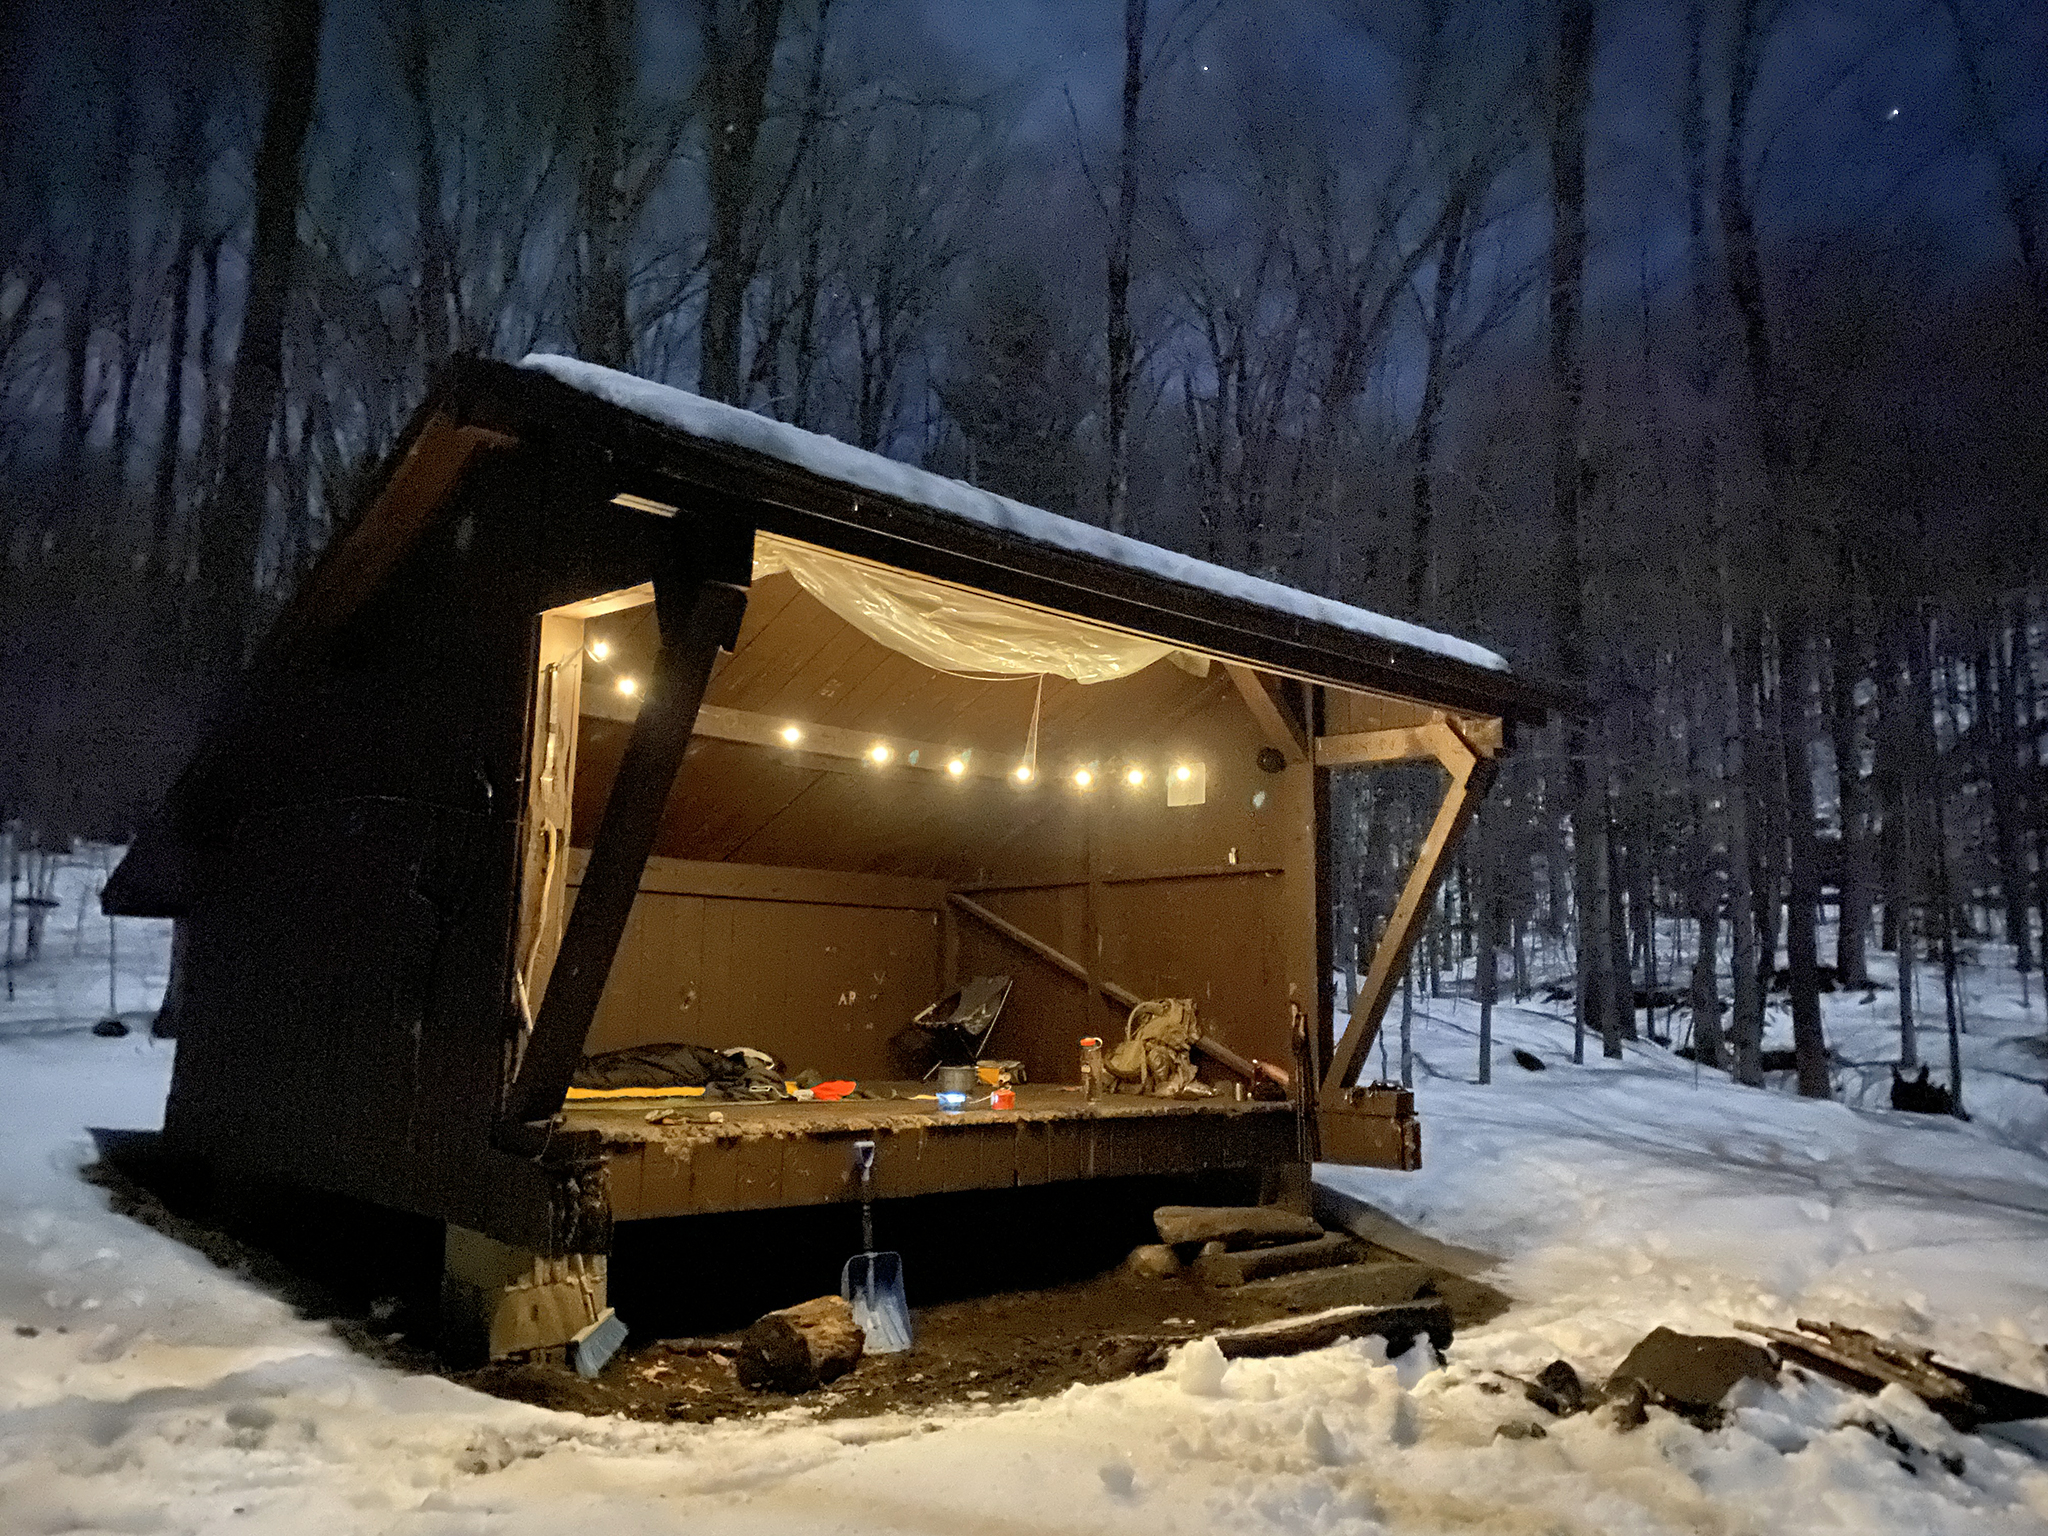 Trip report: A winter’s night on the Dunbar Brook Trail in Monroe State Forest